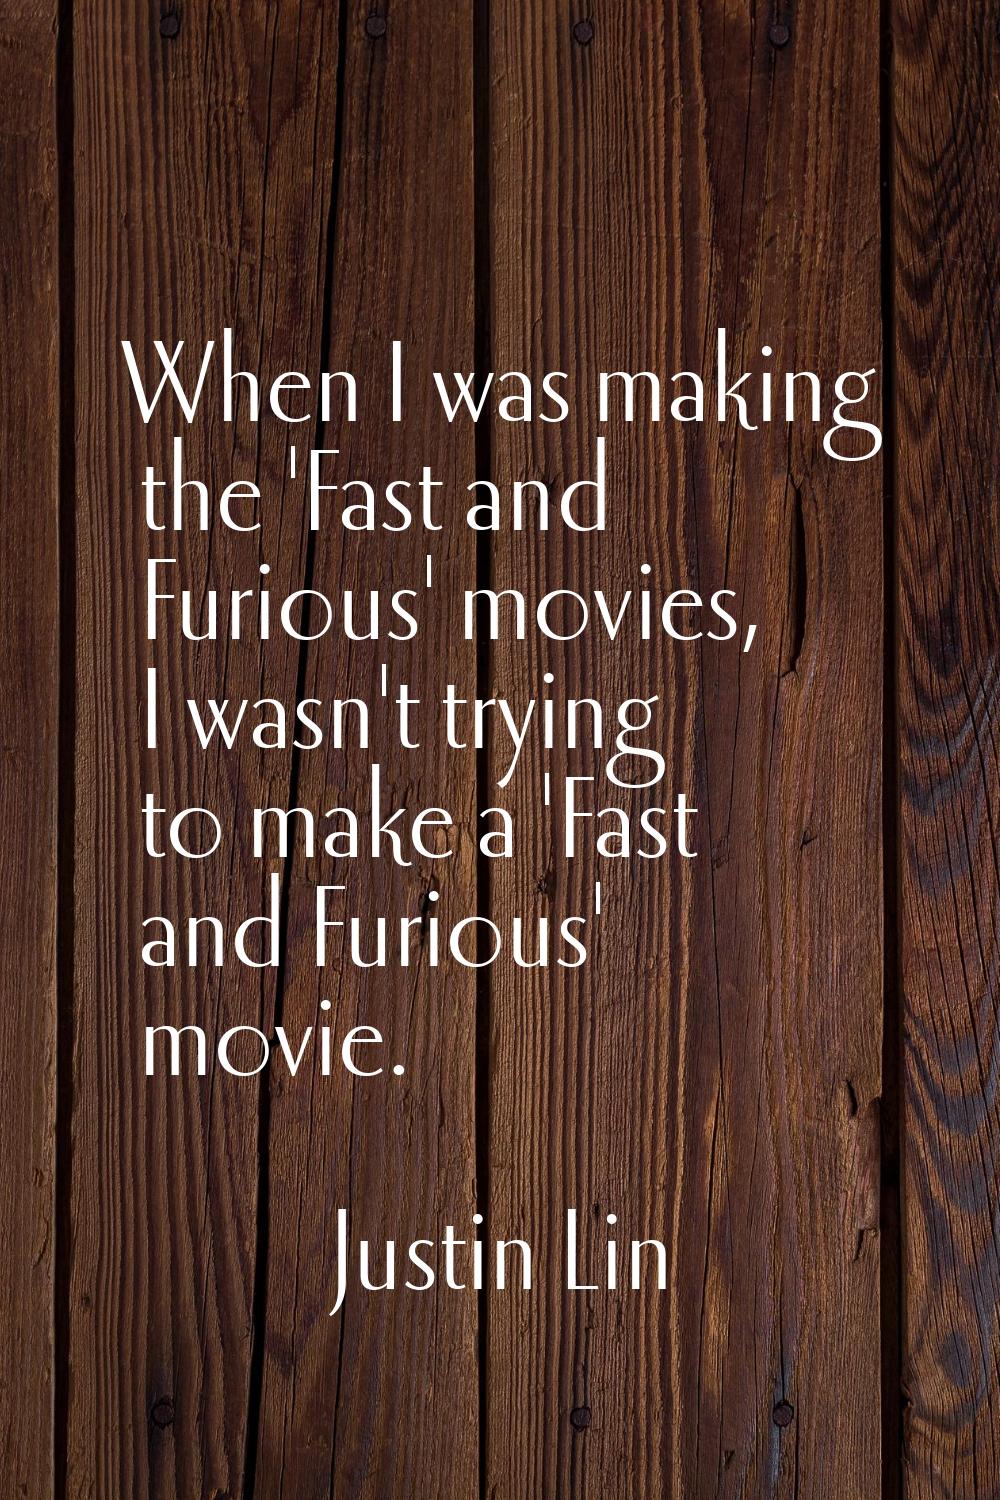 When I was making the 'Fast and Furious' movies, I wasn't trying to make a 'Fast and Furious' movie